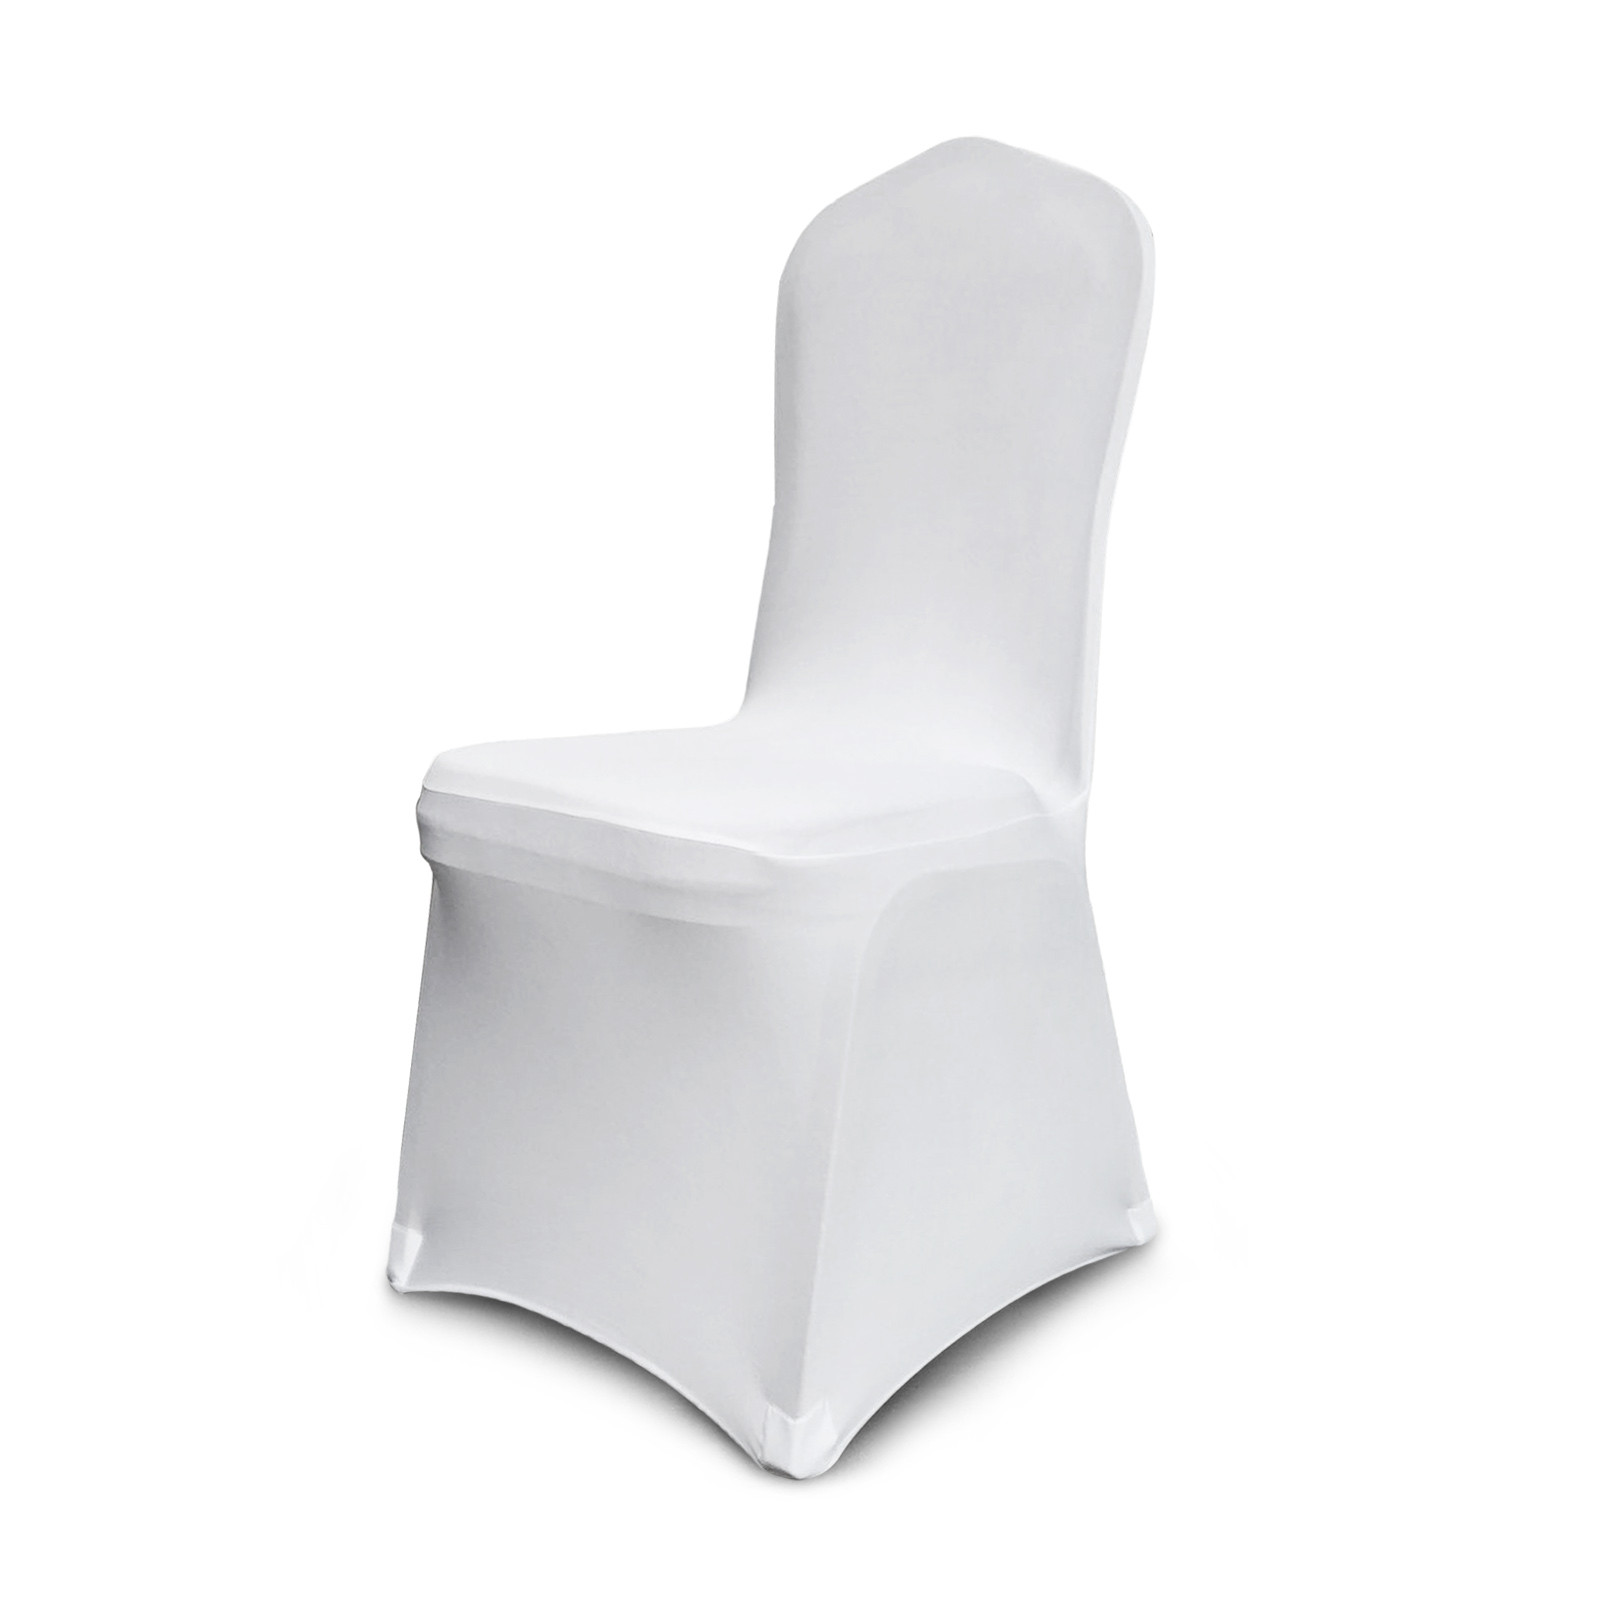 1 6 10 50 100 PREMIUM SPANDEX LYCRA ARCH BANQUET CHAIR COVERS WEDDING PARTY 